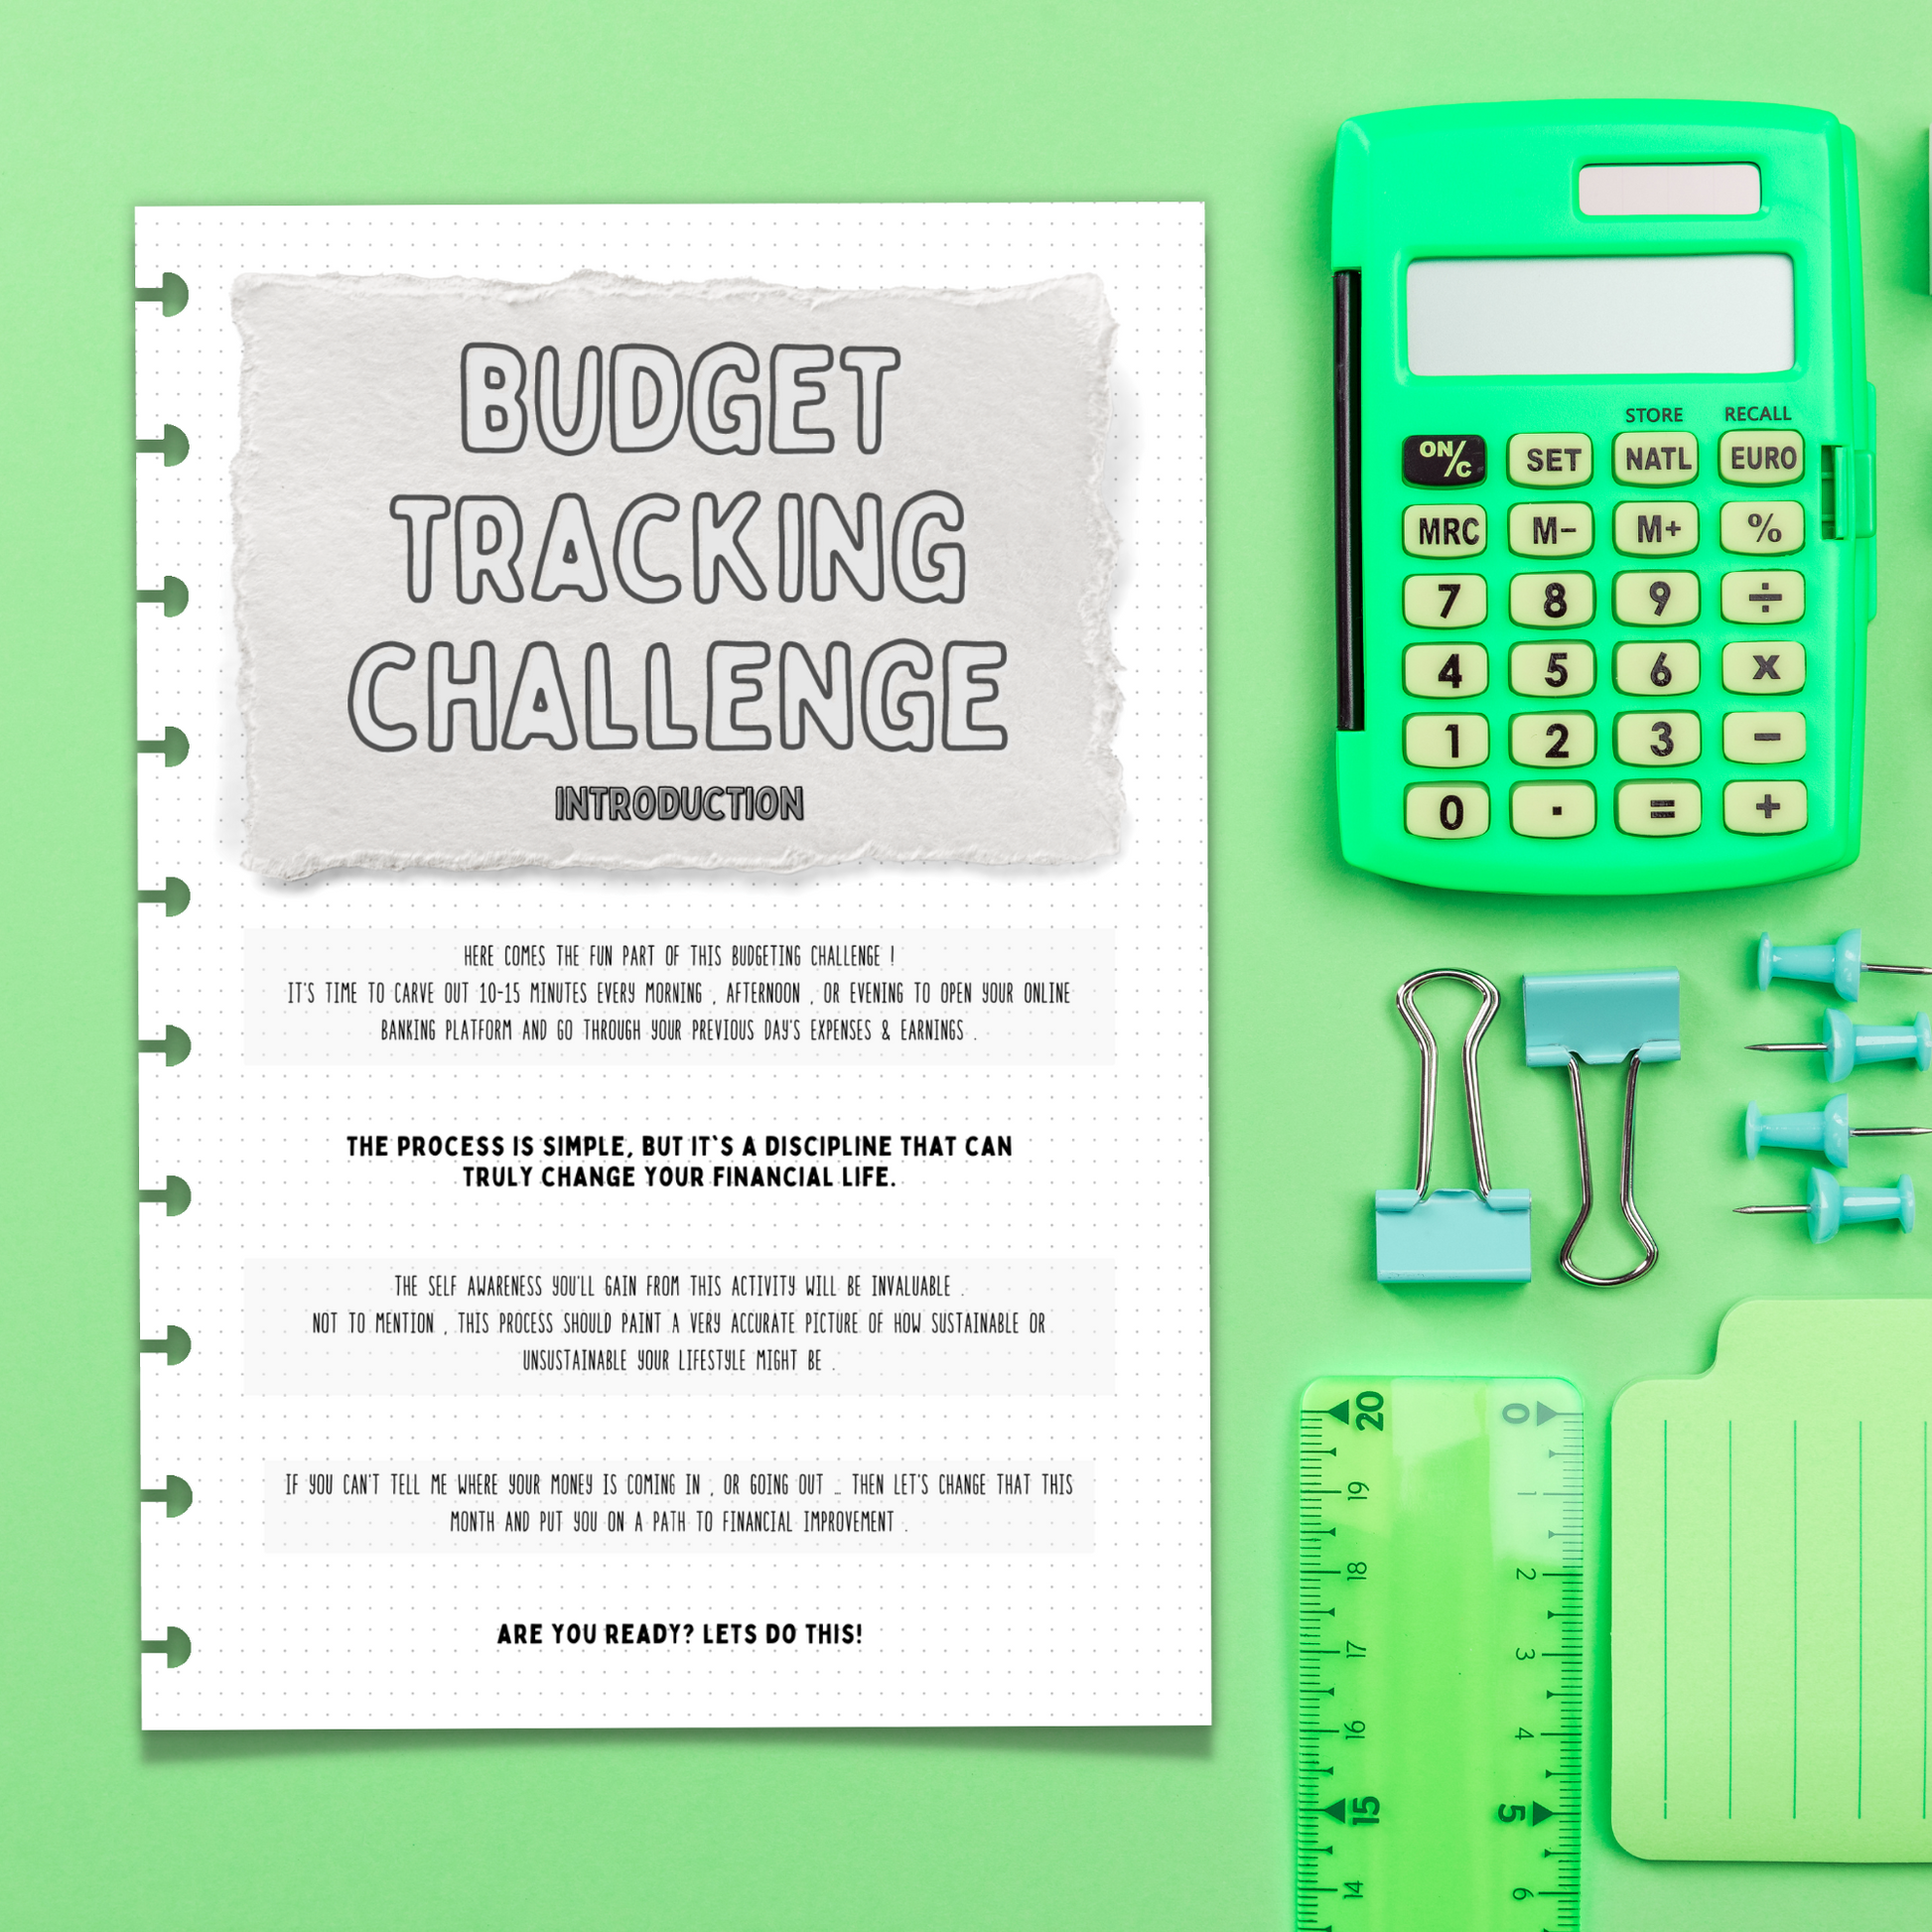 Preview of "Budget Tracking Challenge Introduction" page